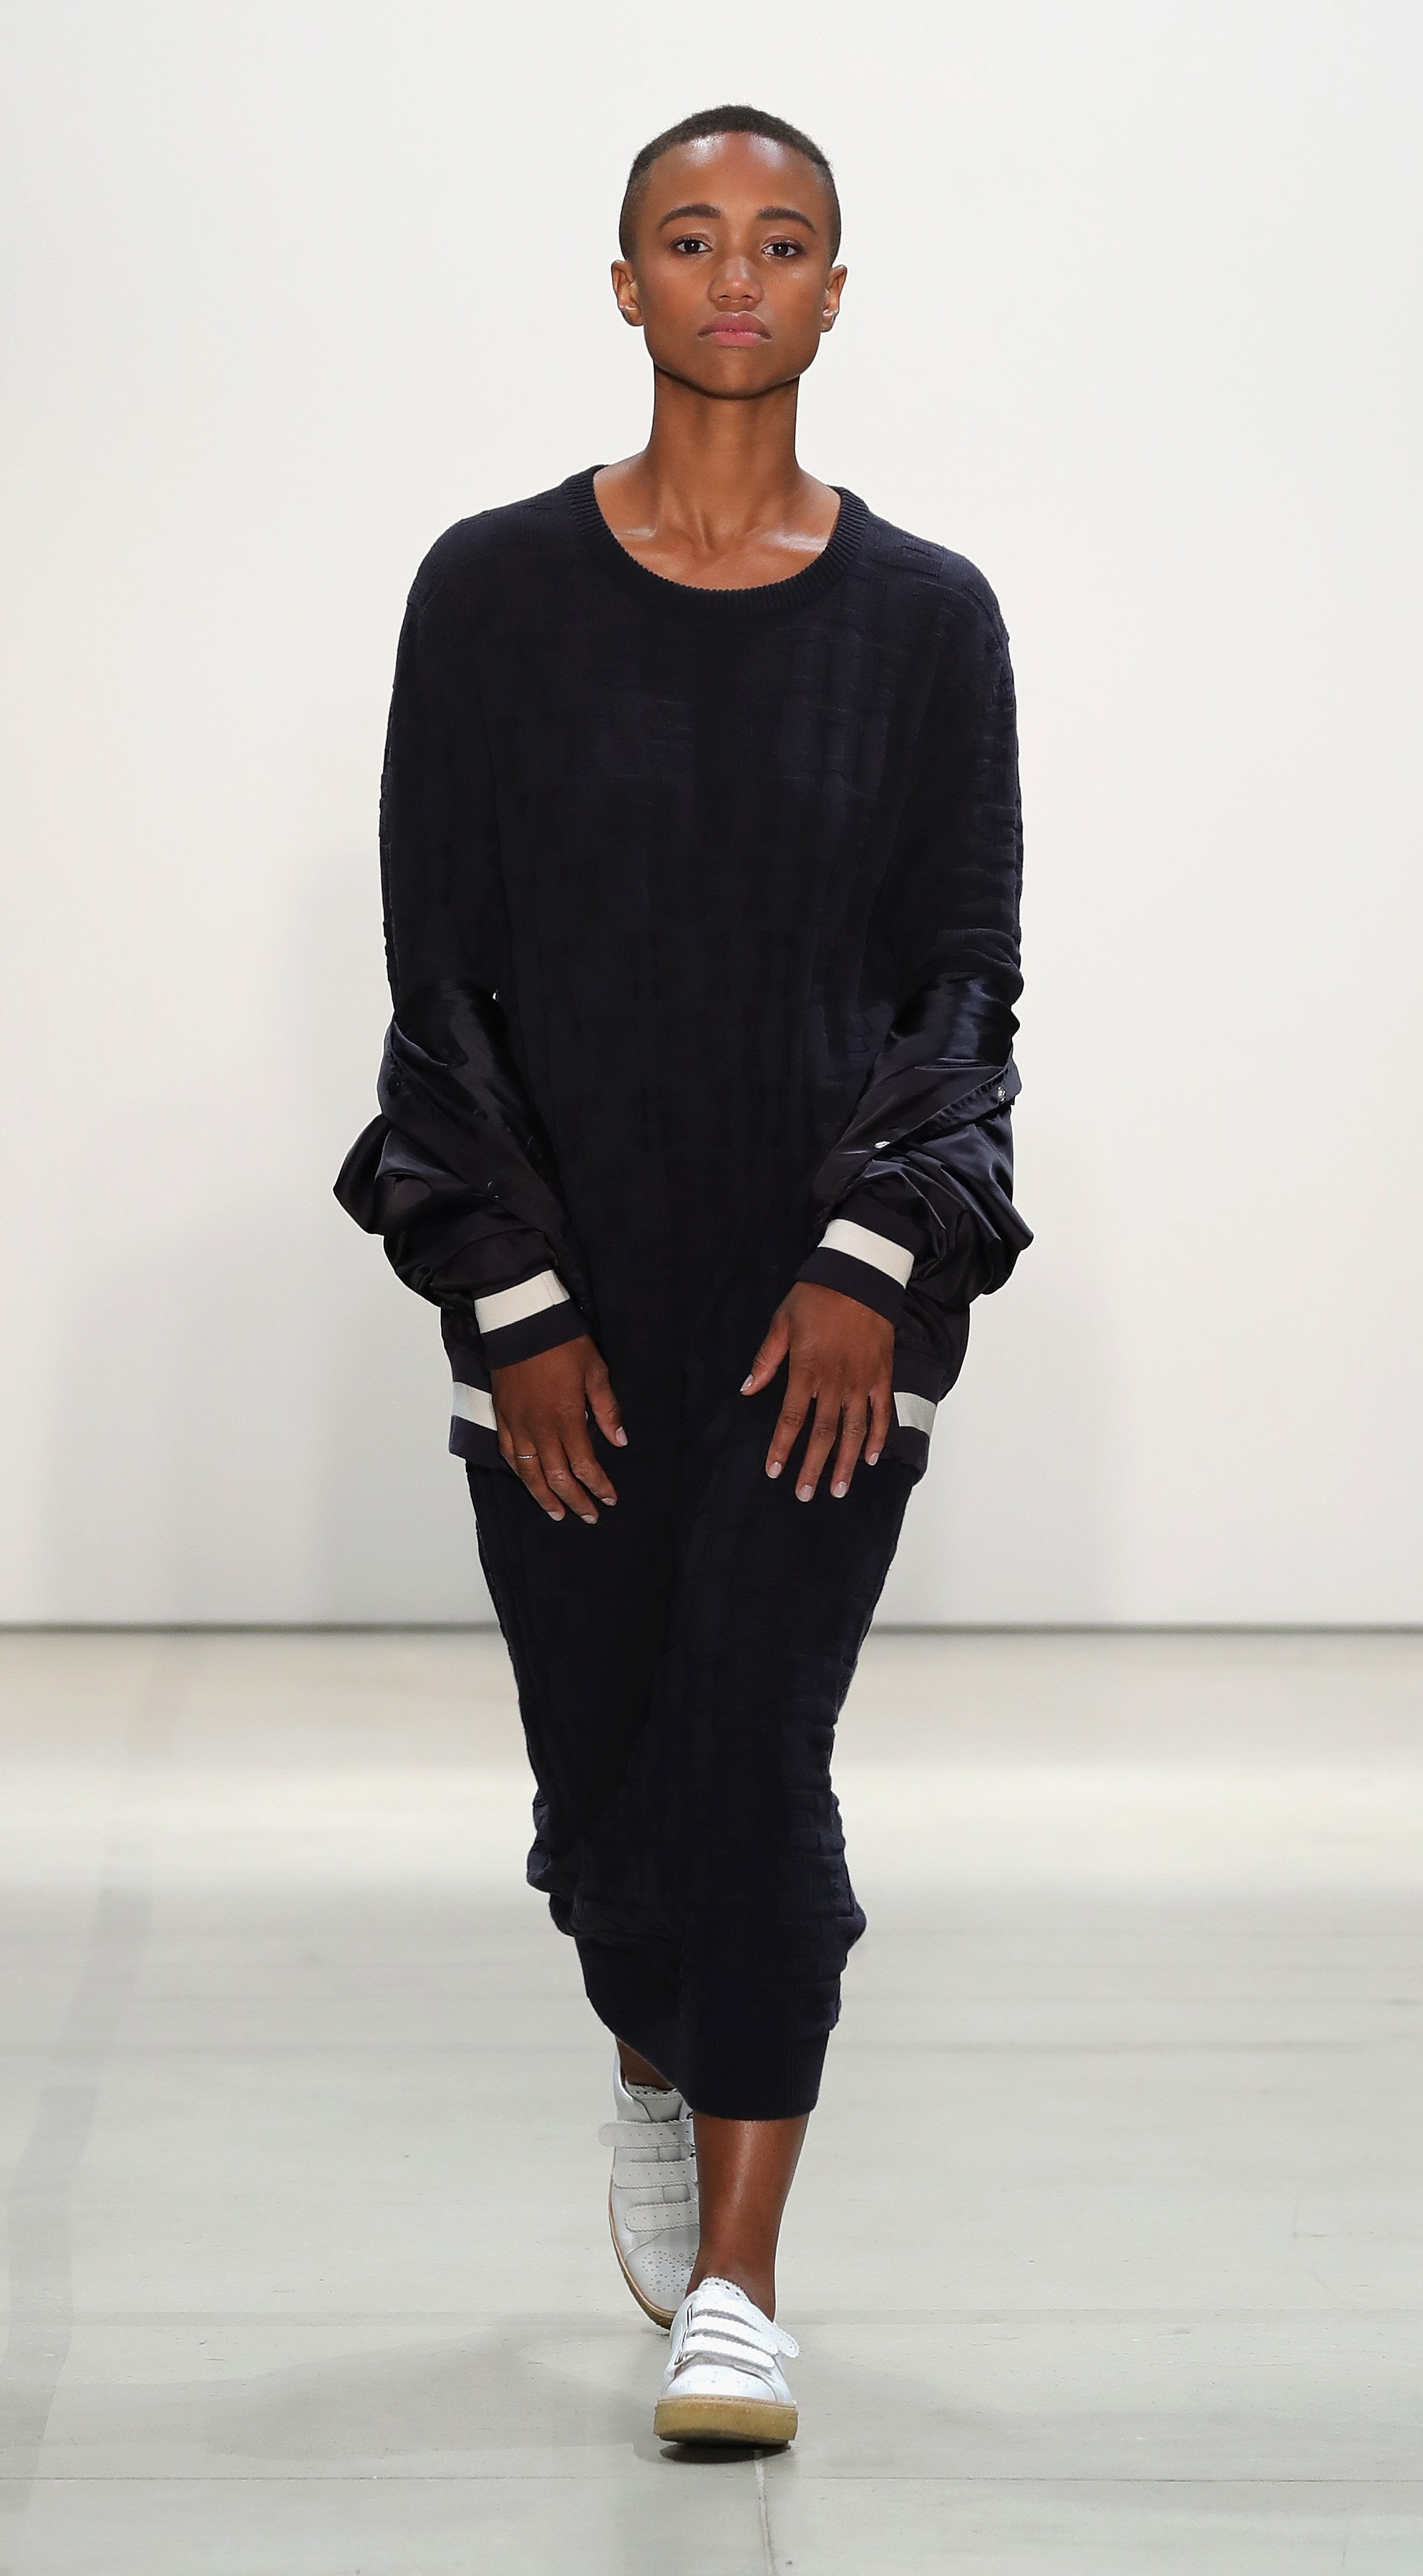 Stylebook at NYFW: Pittsburghers make their mark at New ...